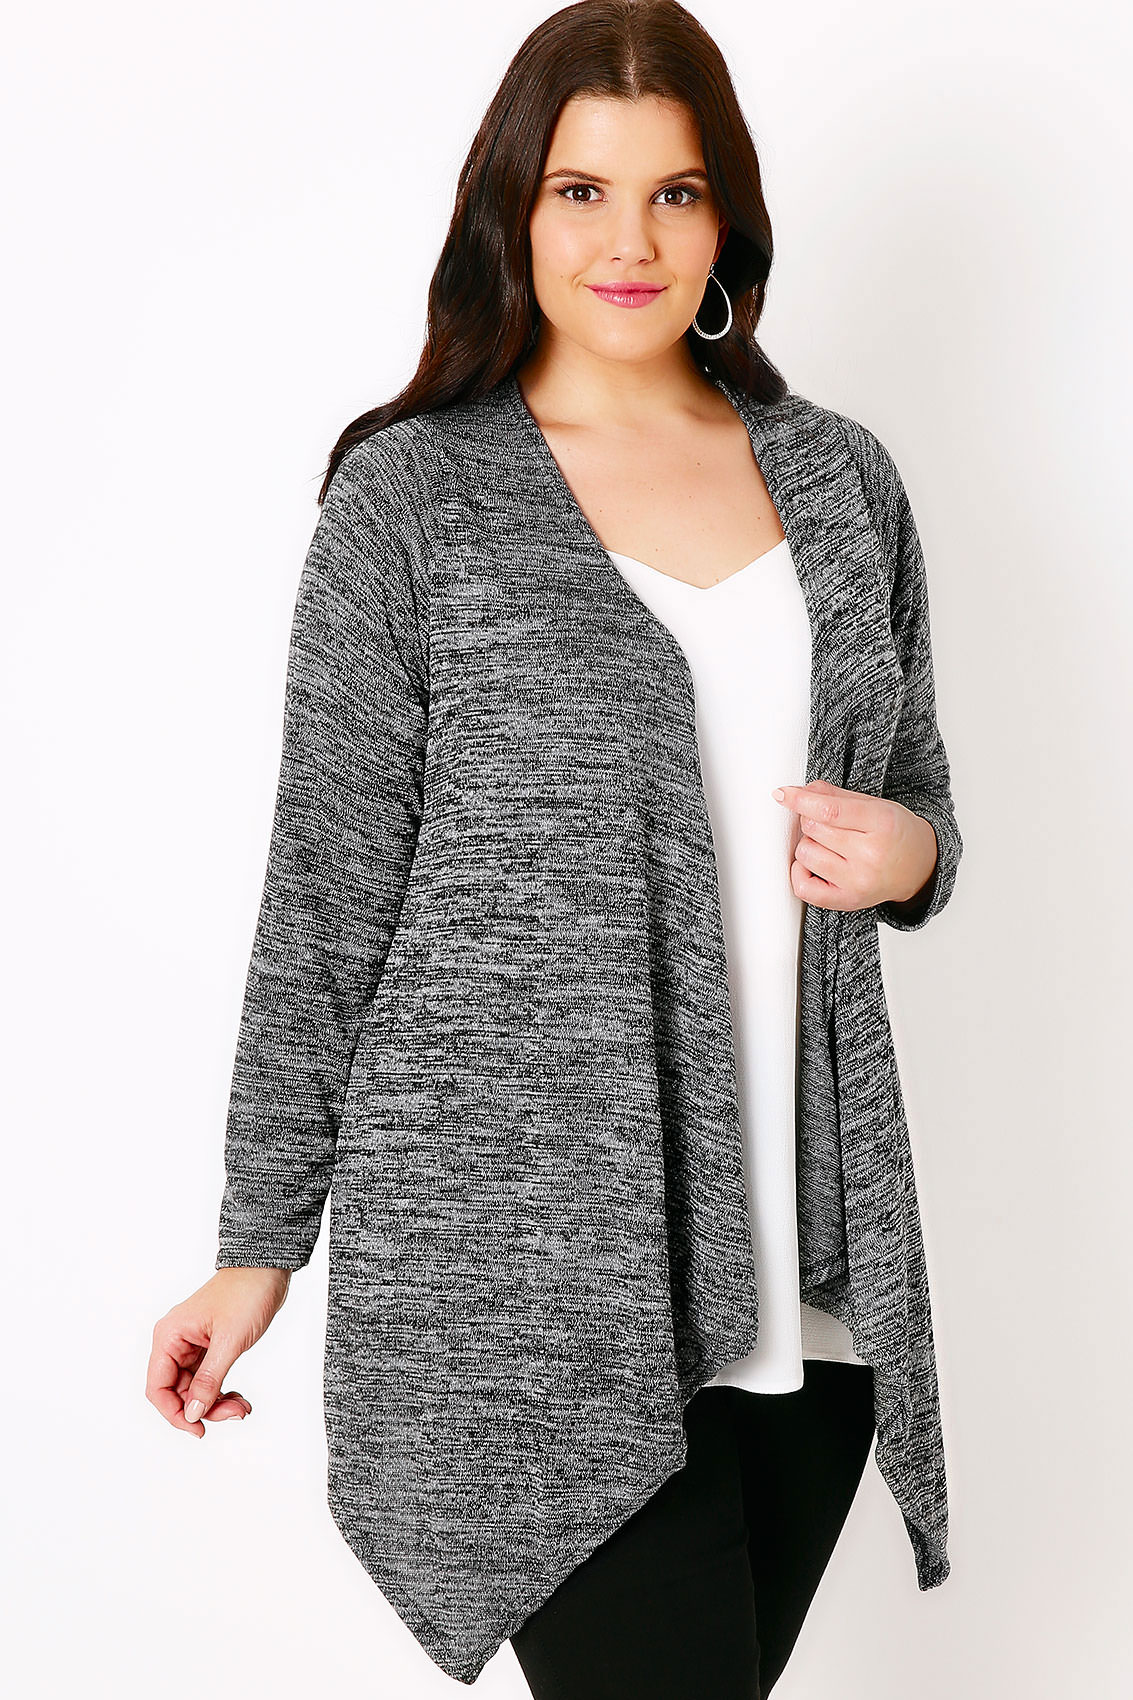 Grey Sparkle Cardigan With Waterfall Front, Plus size 16 to 36